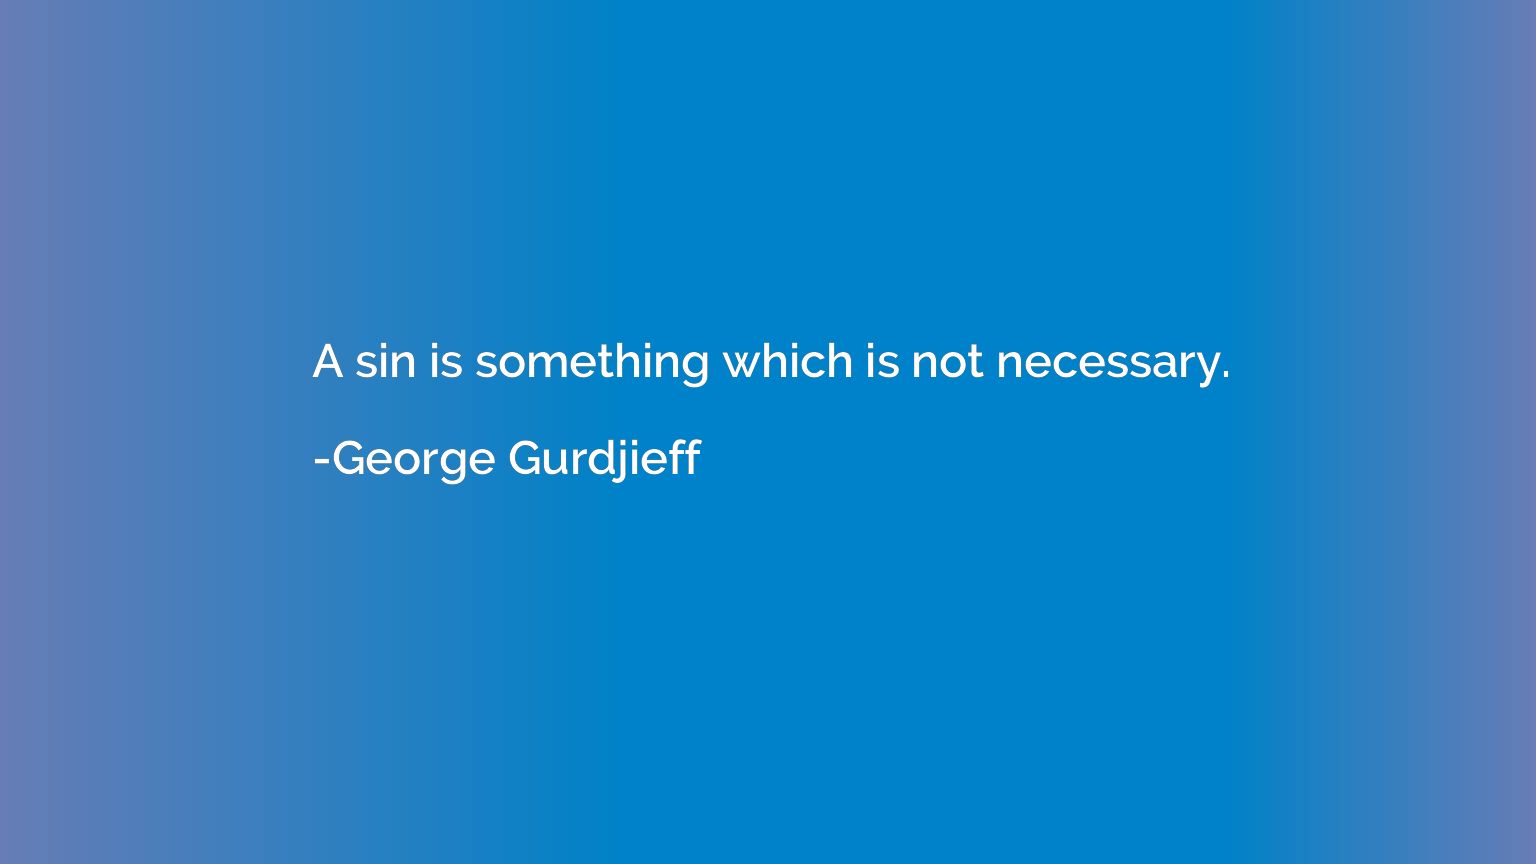 A sin is something which is not necessary.